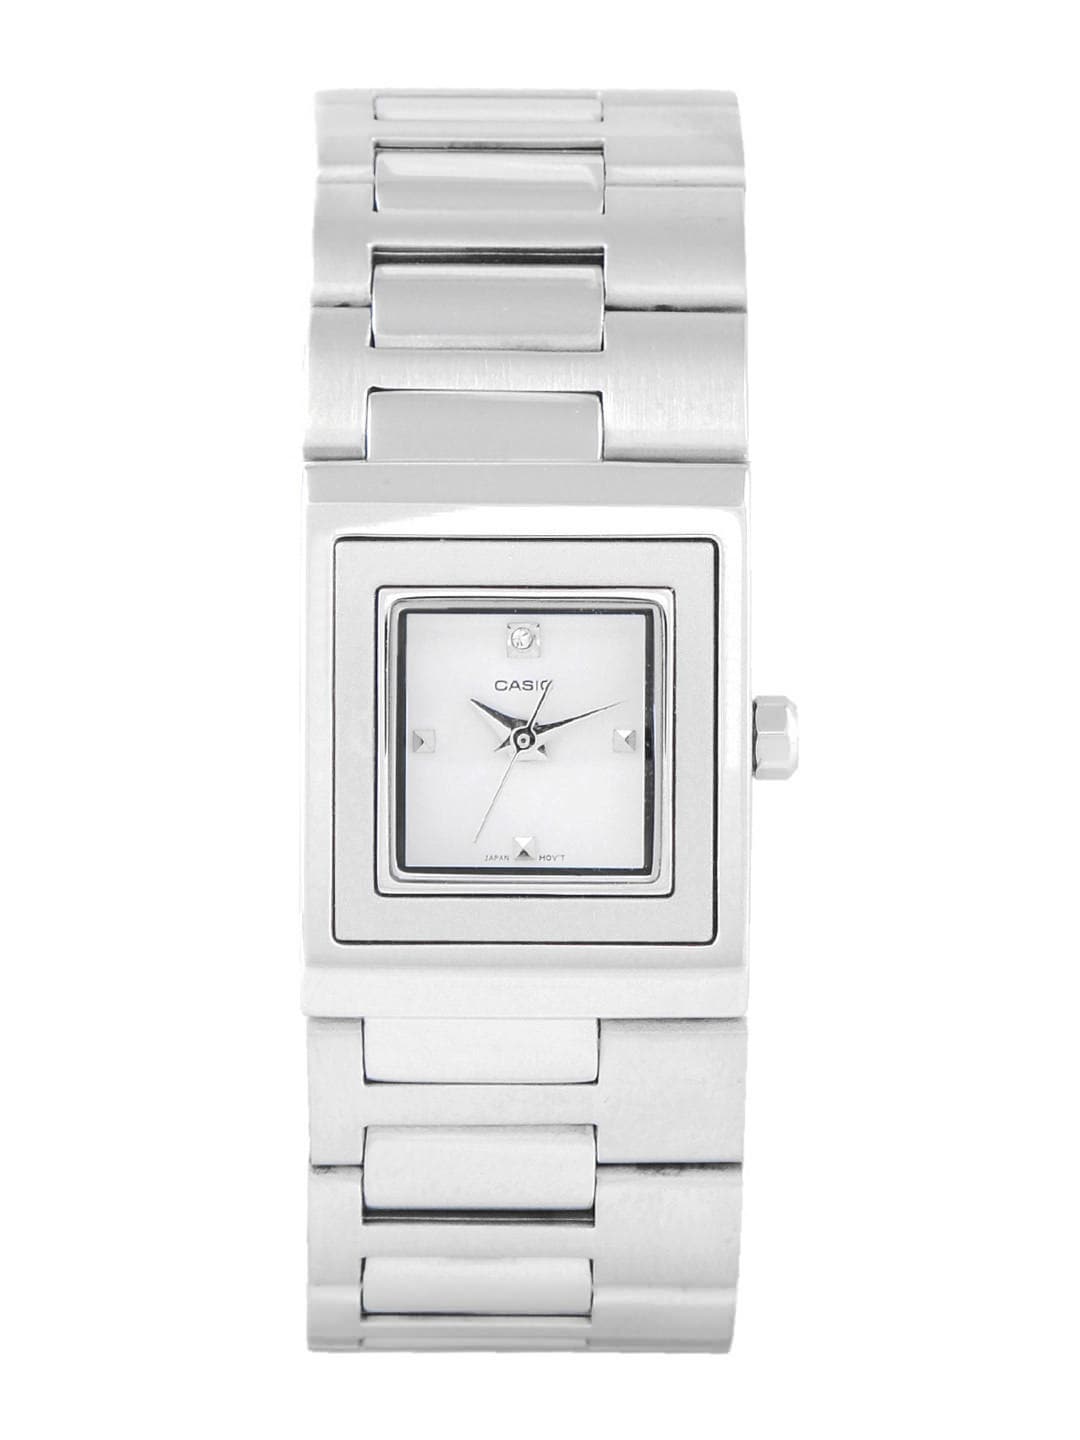 CASIO ENTICER Women White Dial Analogue Watch A668